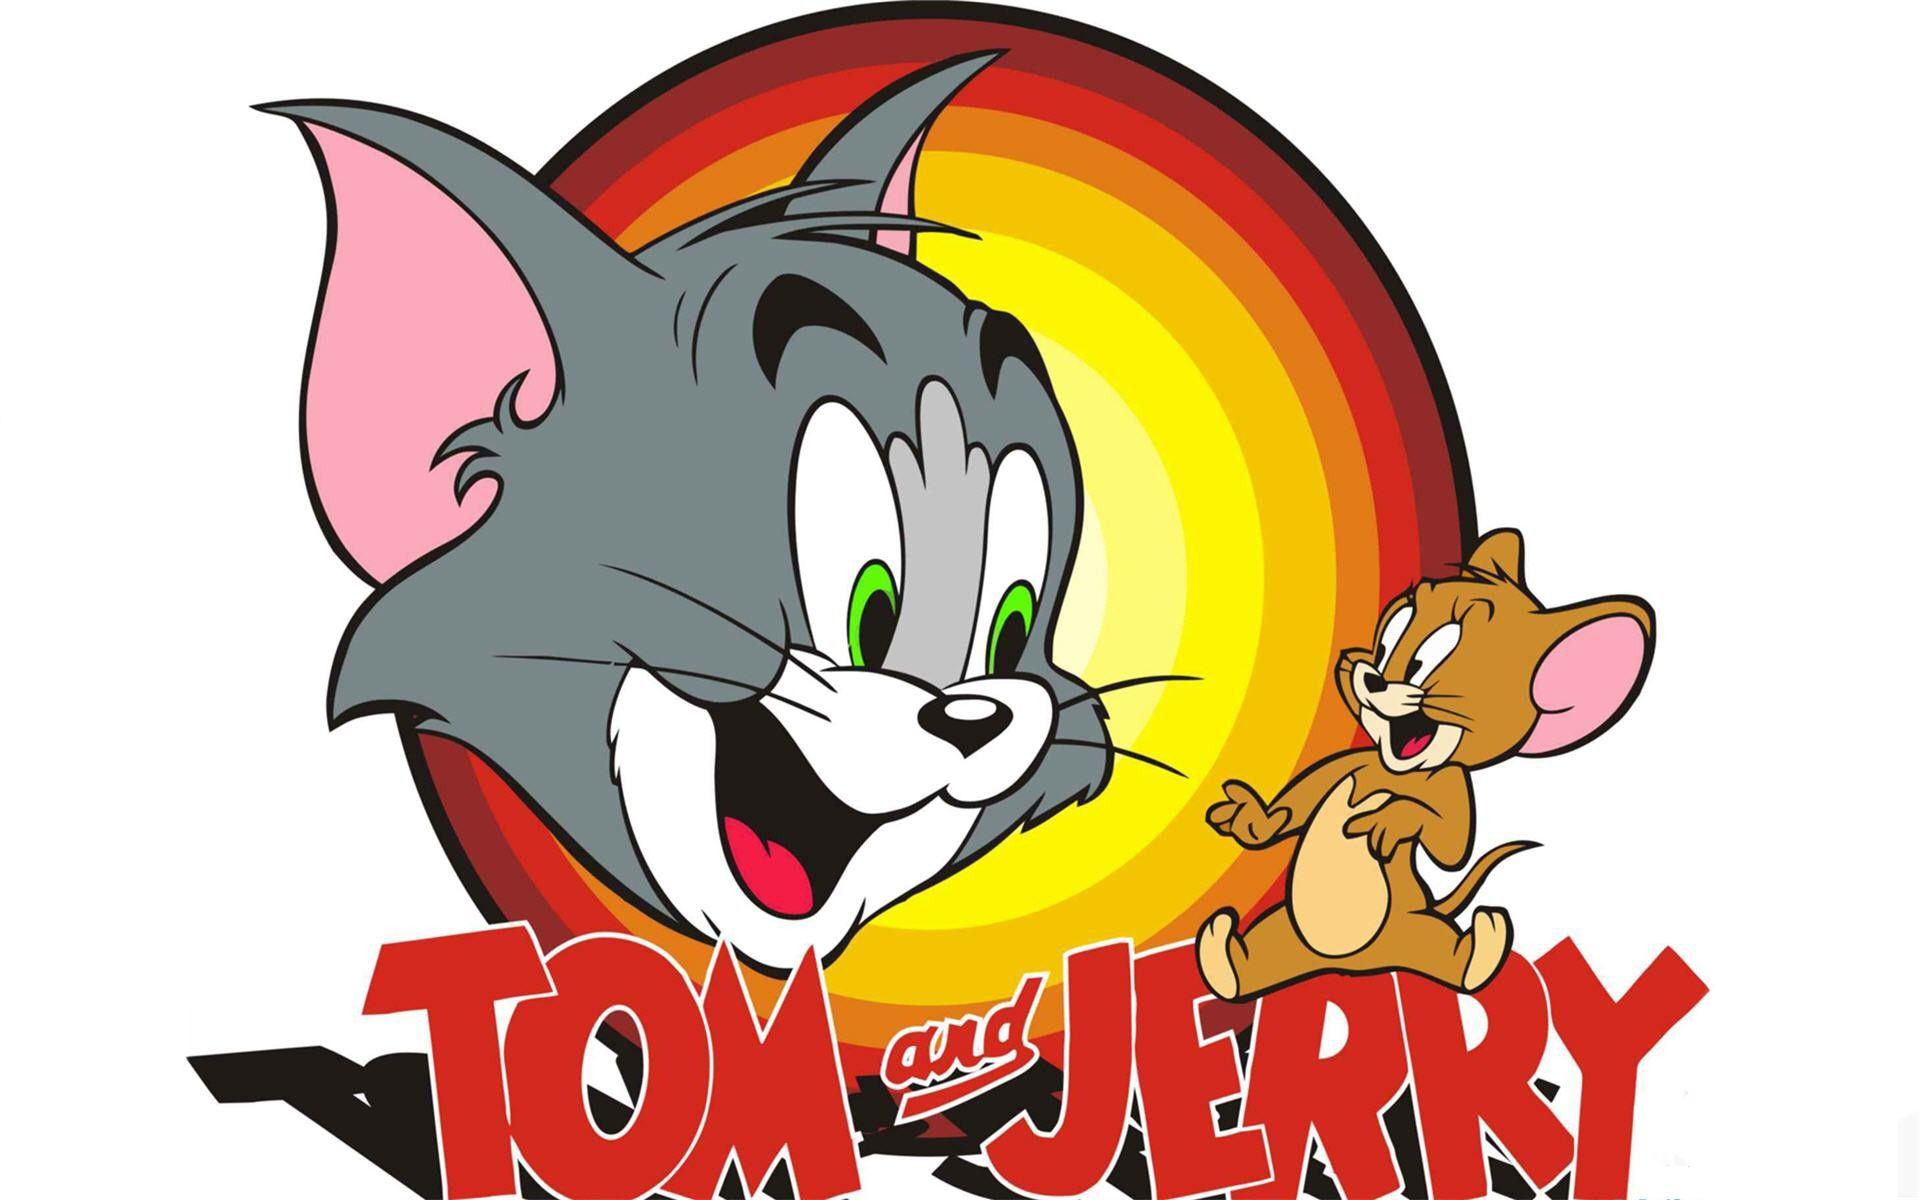 Tom and Jerry Logo - Tom And Jerry Logo #7001390